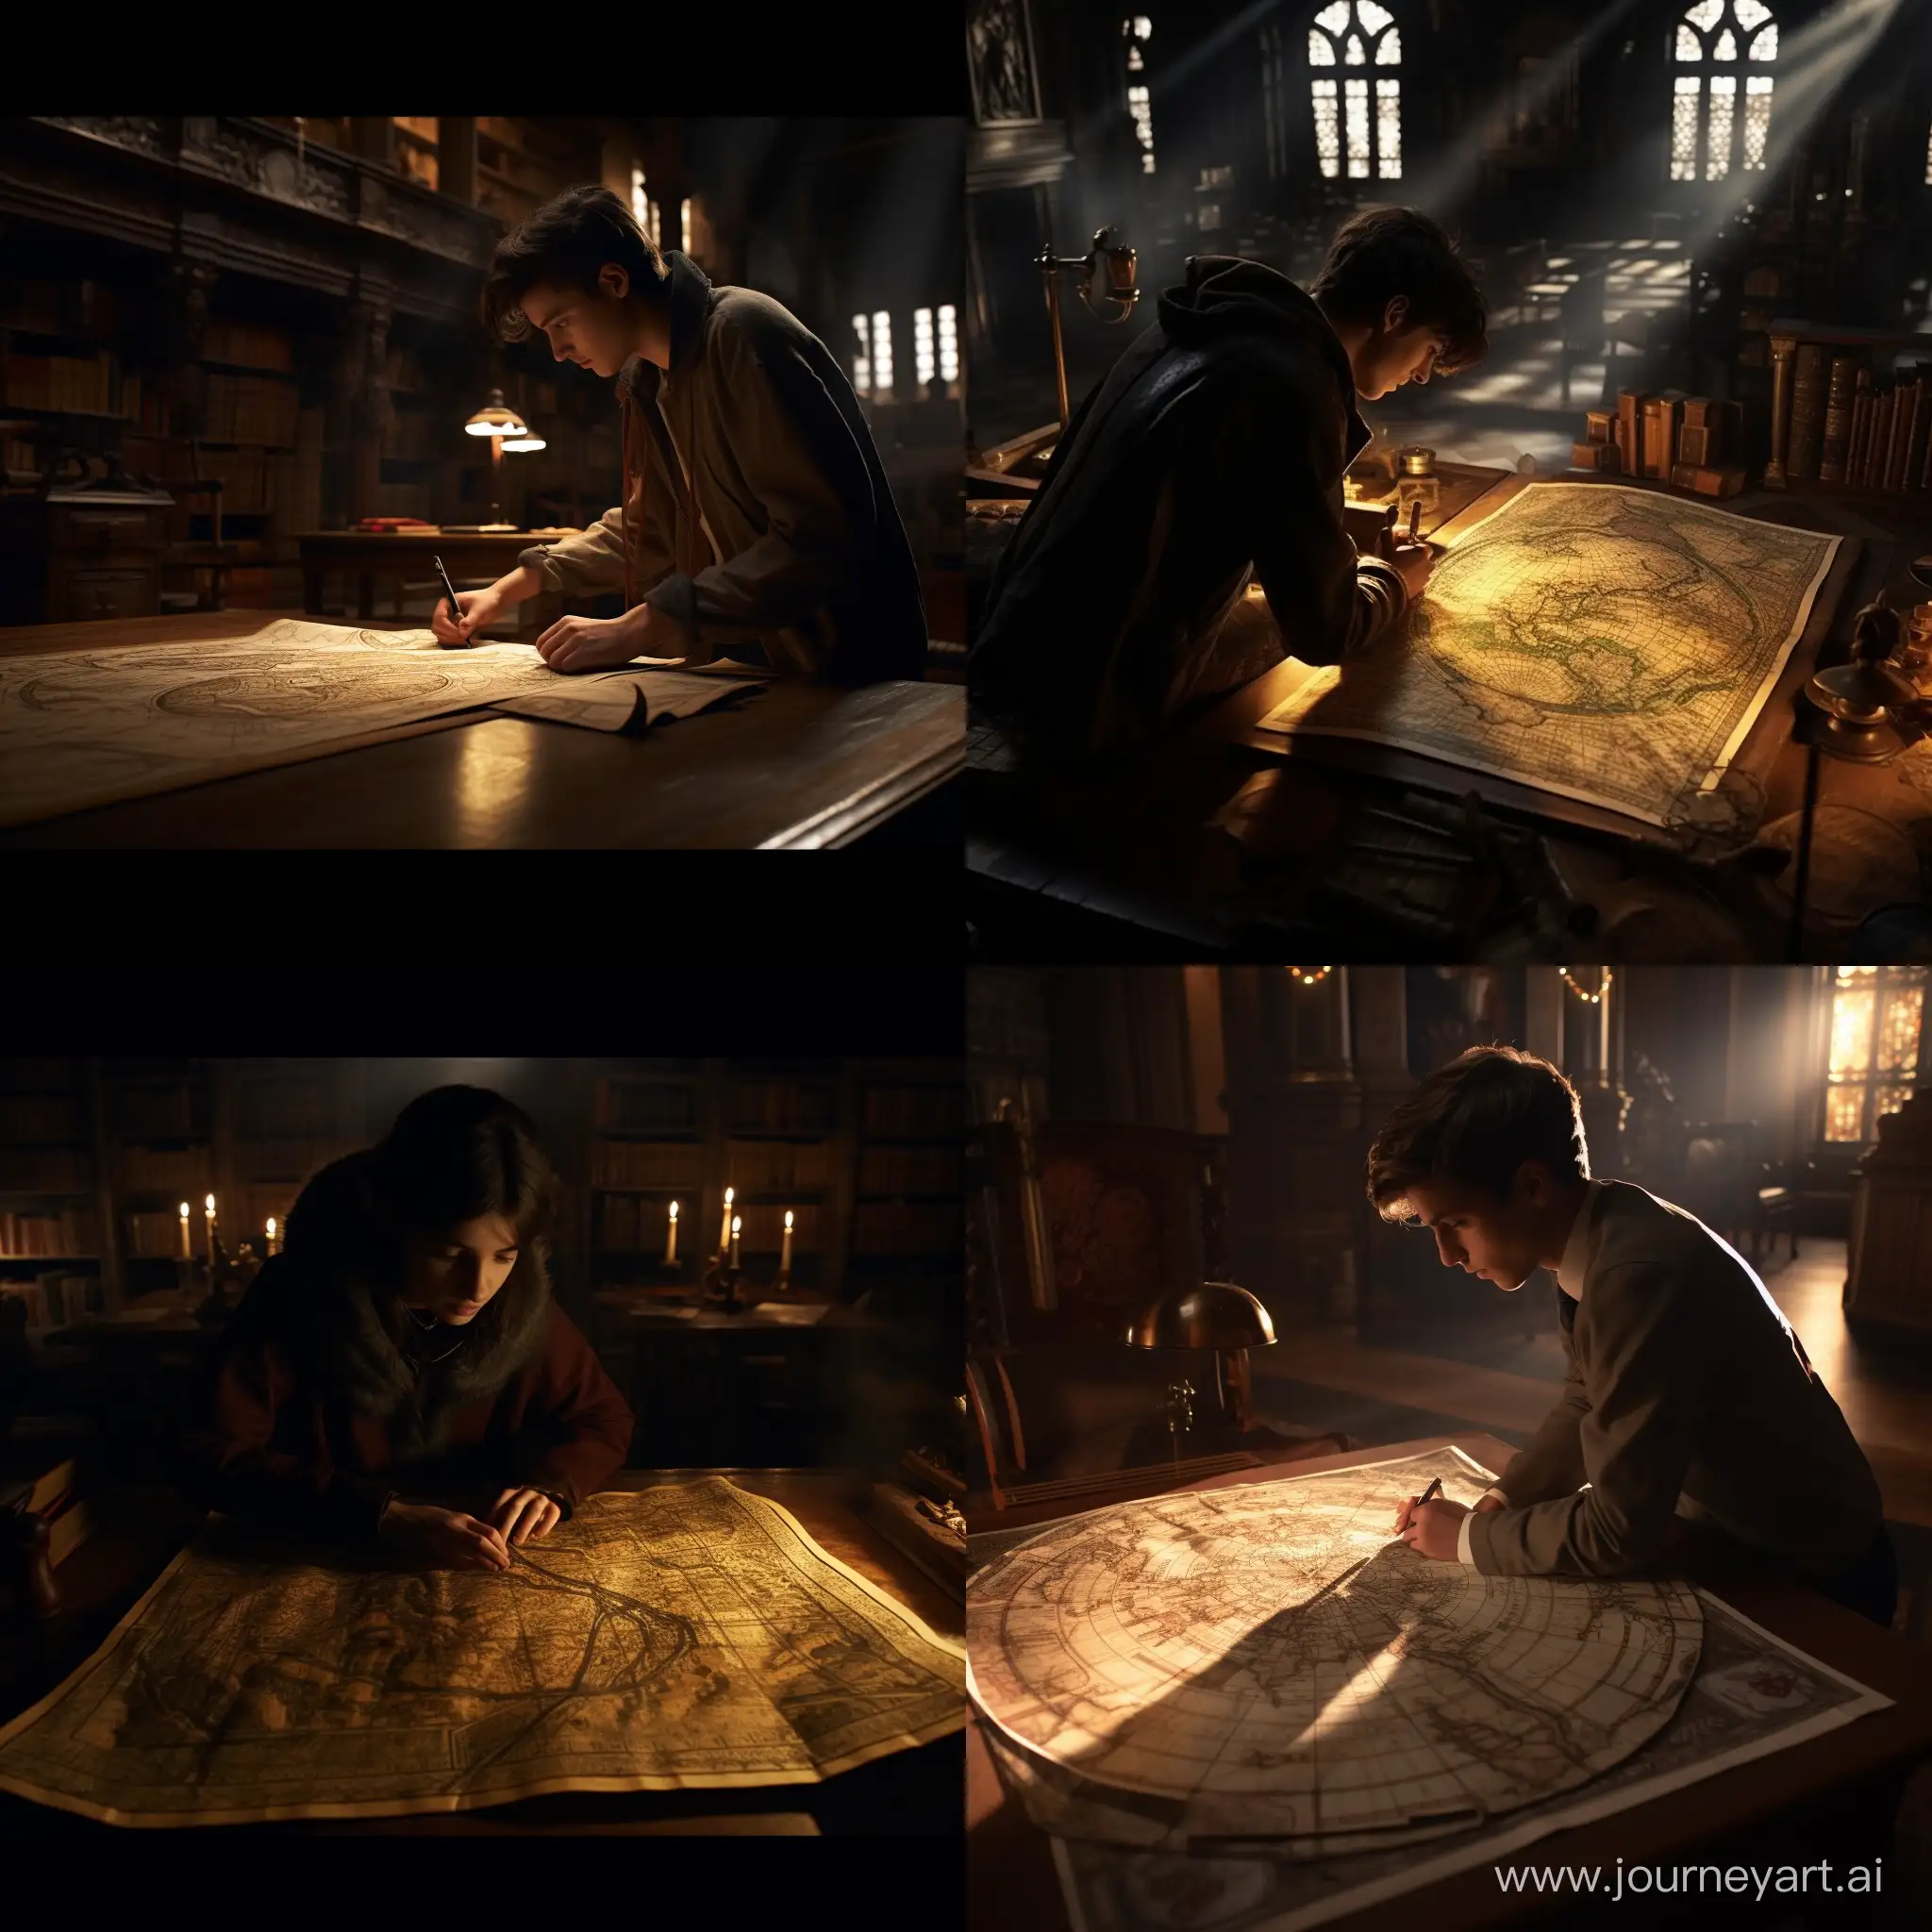 As the protagonist stumbles upon an ancient map in an old library, the camera zooms in on the intricate details of the parchment, revealing cryptic symbols and hidden clues. Cinematic, dramatic lighting enhances the sense of intrigue and discovery, creating an aura of mystery, -- ar 16:9.